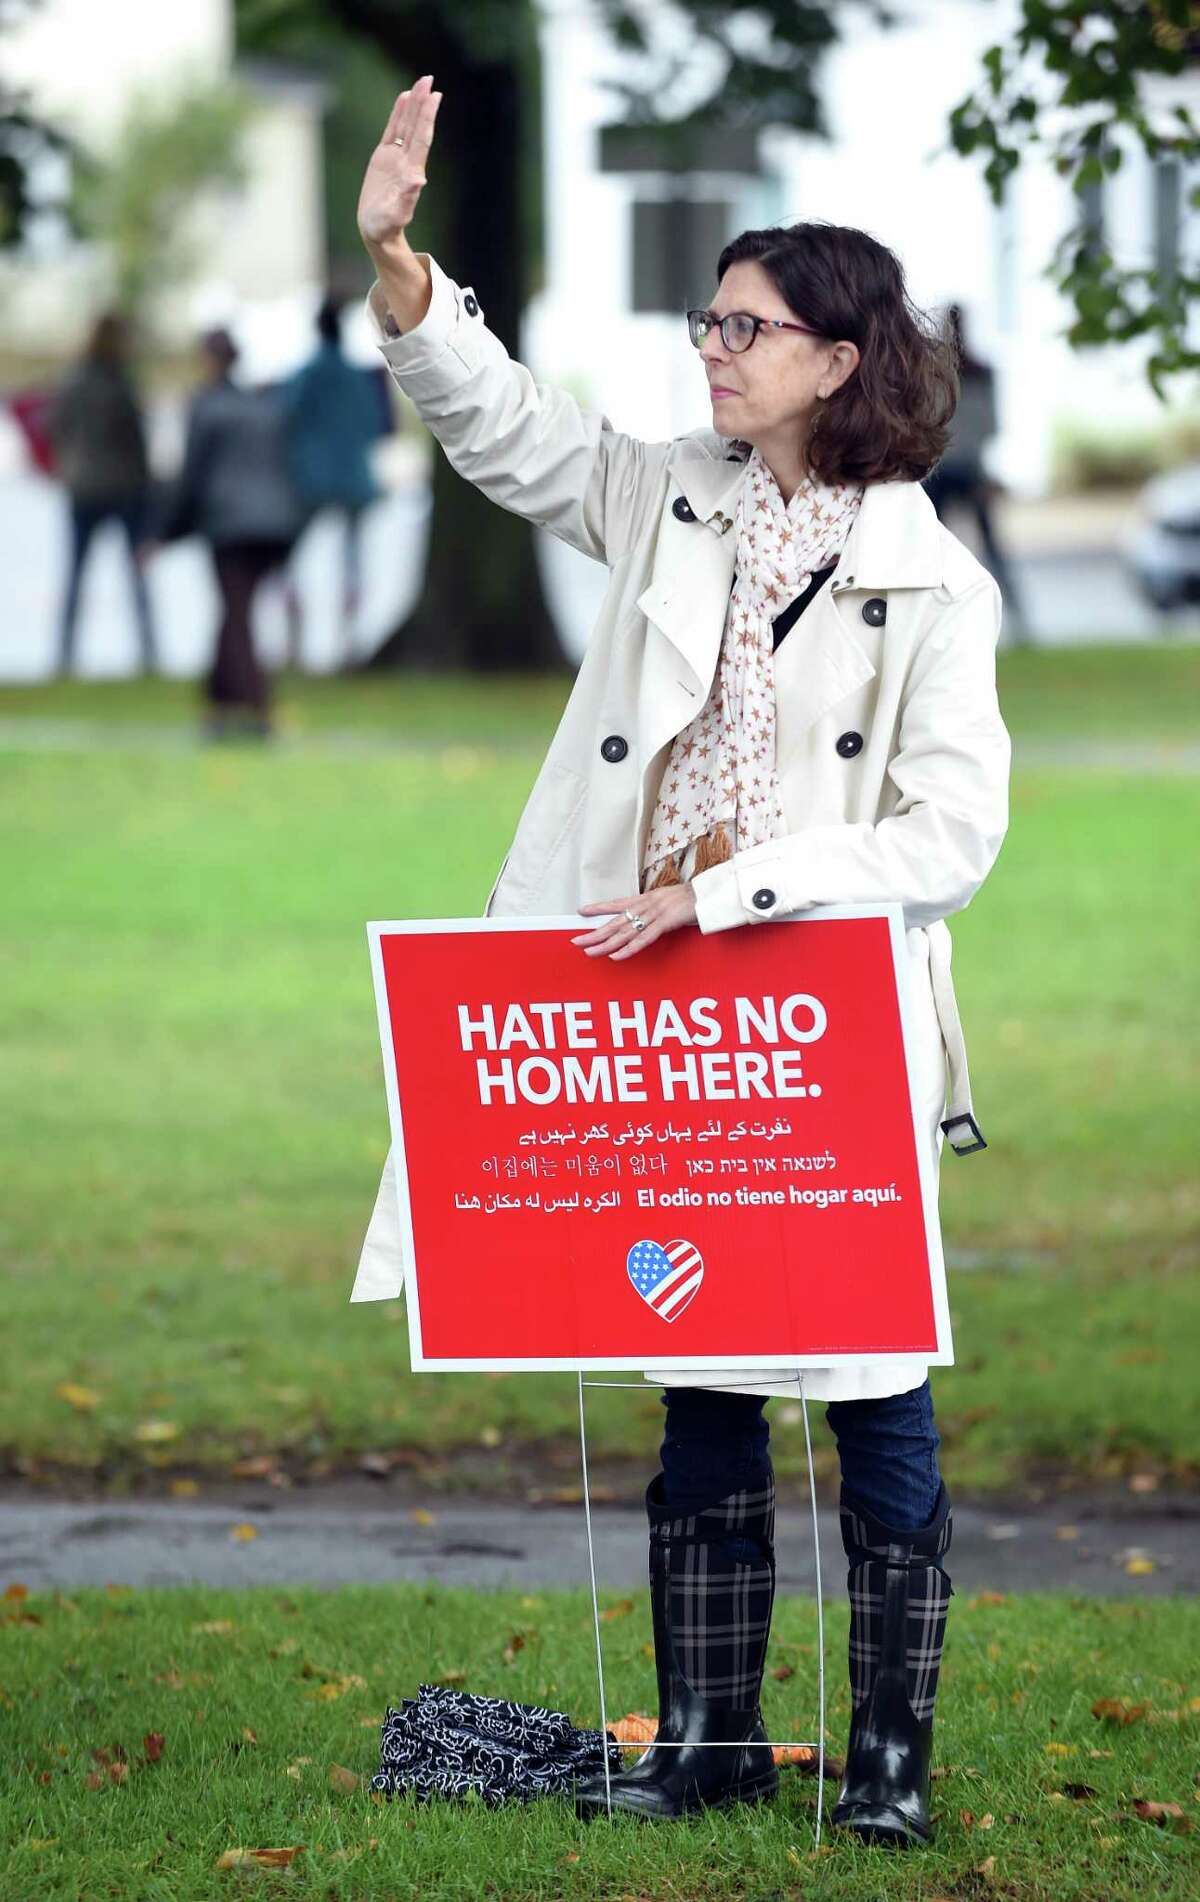 Milford antirally gets honks thumbs up from passers by